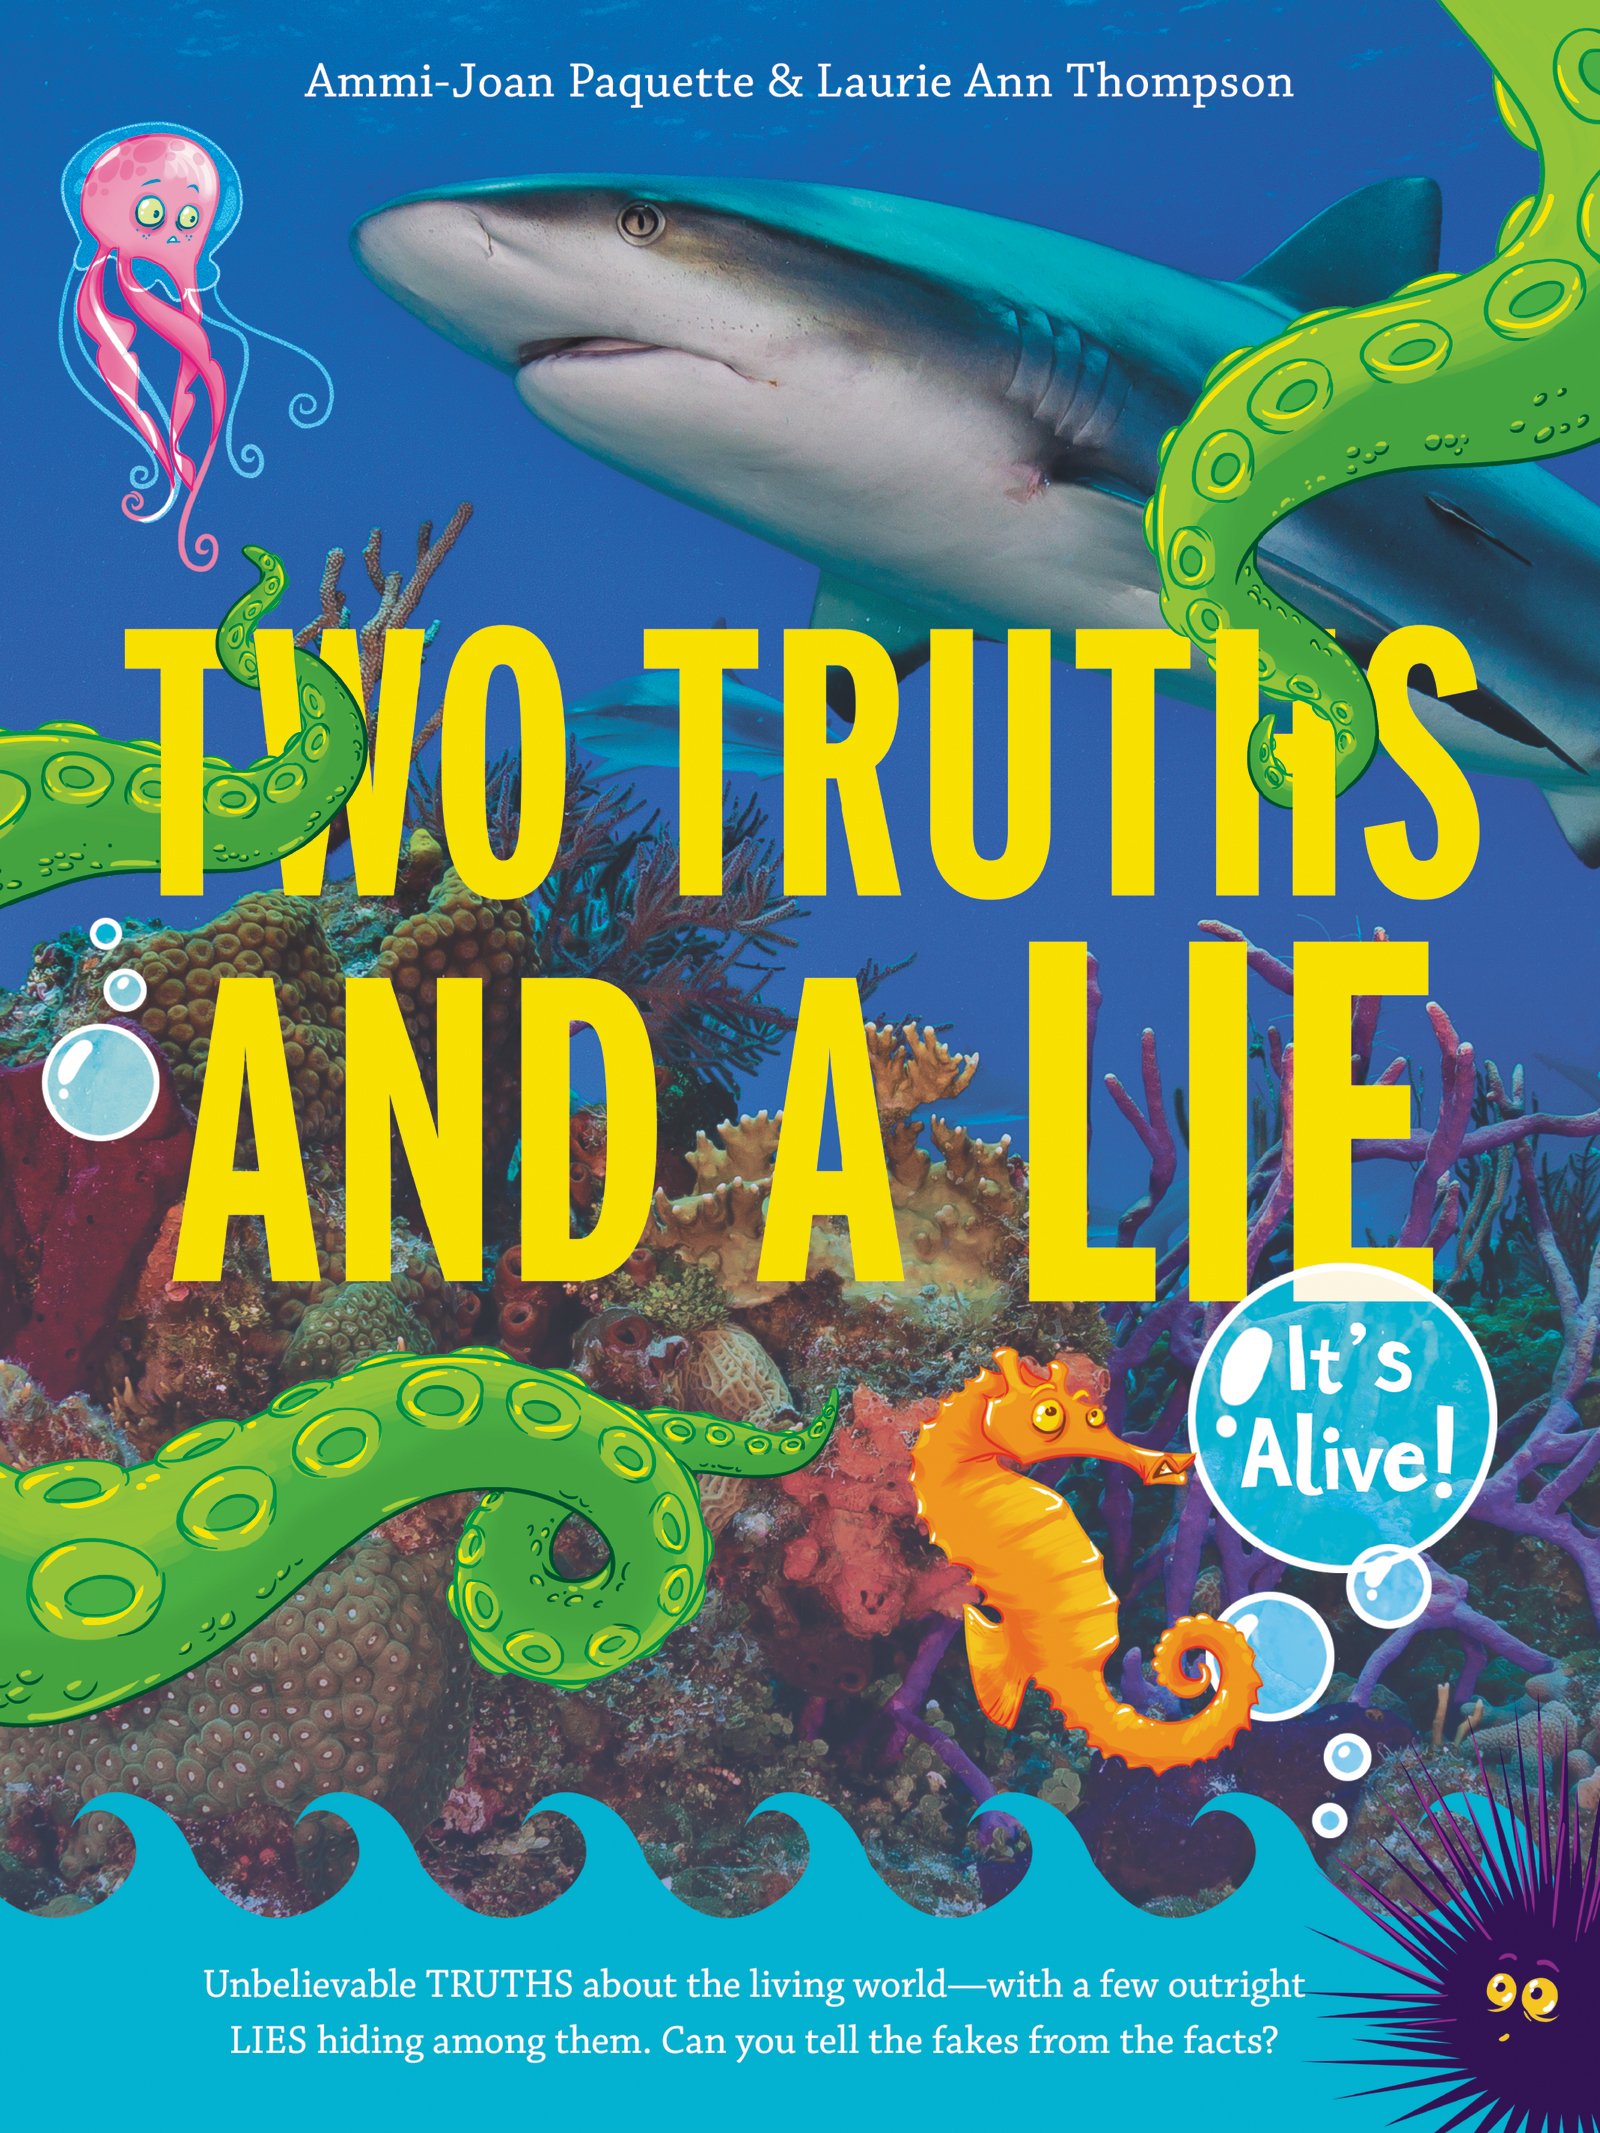 Two Truths and a Lie by Ammi-Joan Paquette and Laurie Ann Thompson